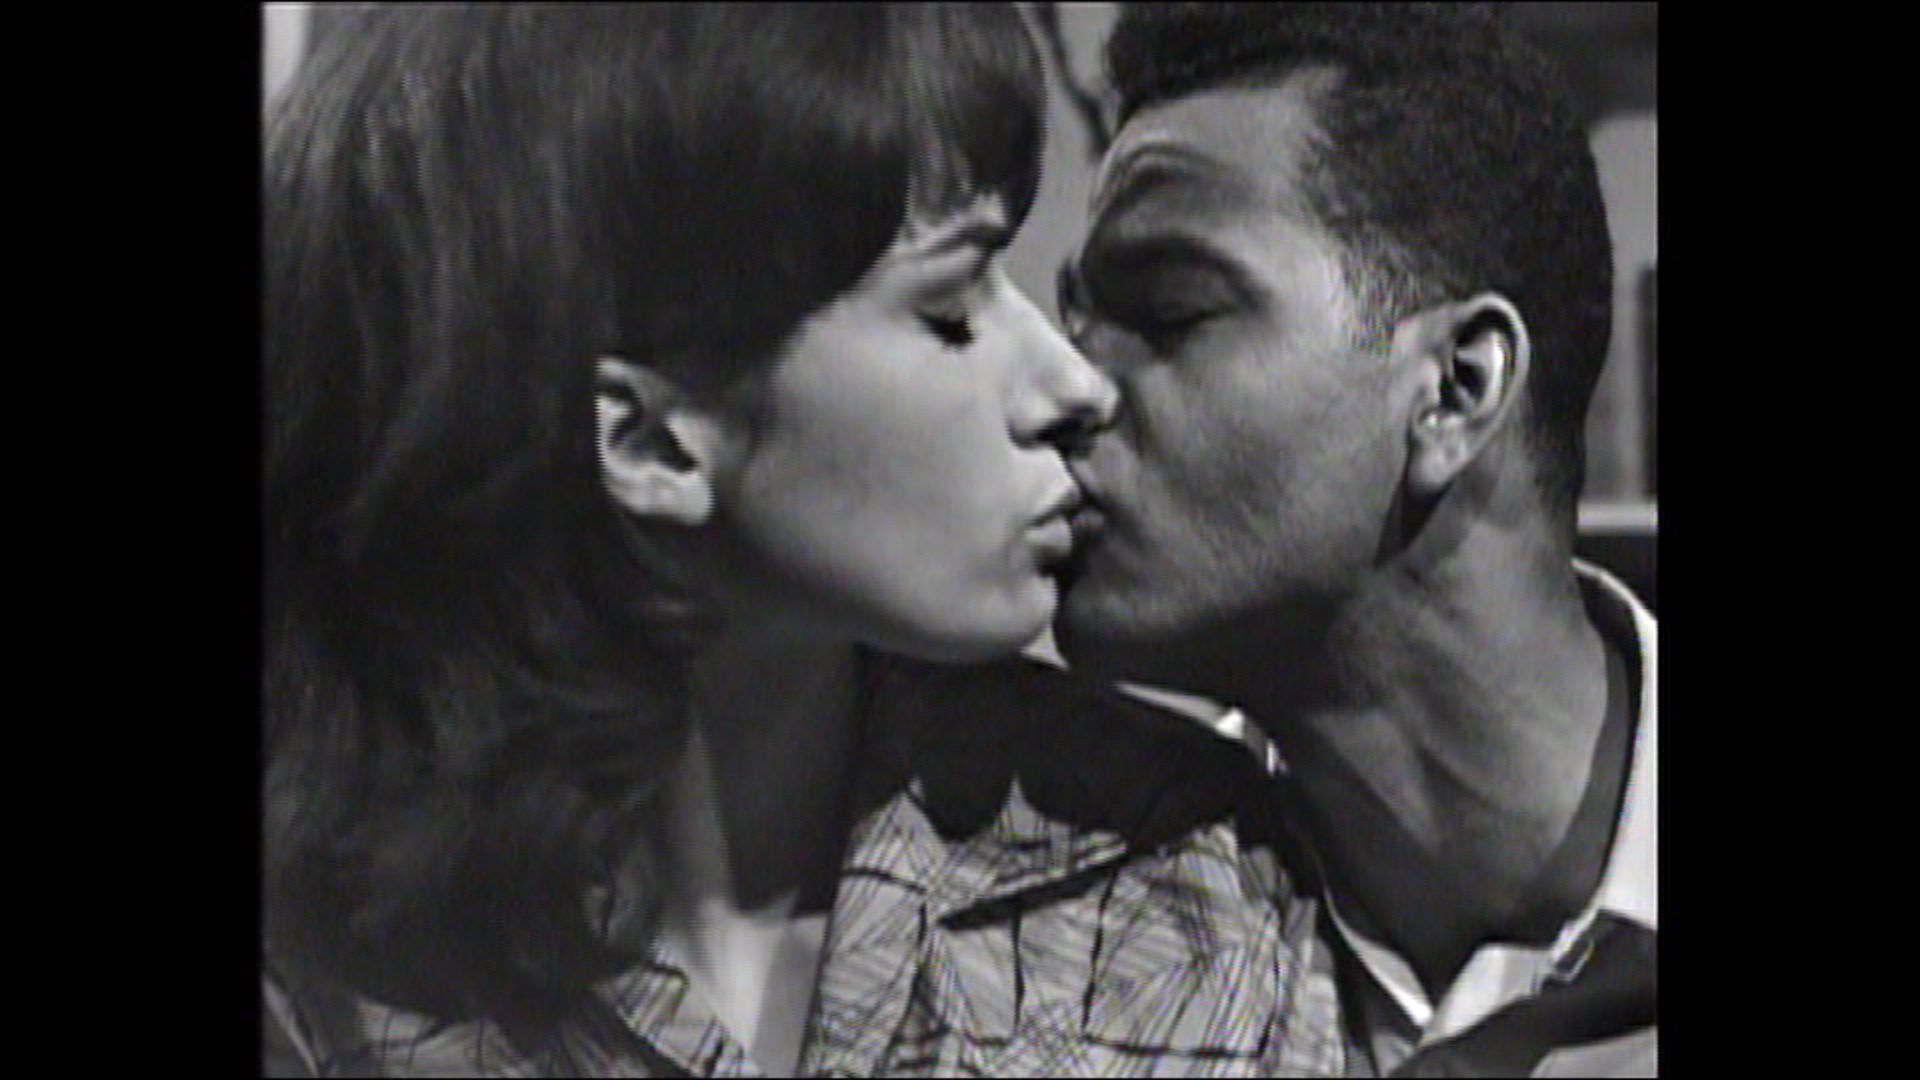 Forced Interracial Porn - Uncovered footage reveals 'first' interracial kiss on TV, before Star Trek  | CNN